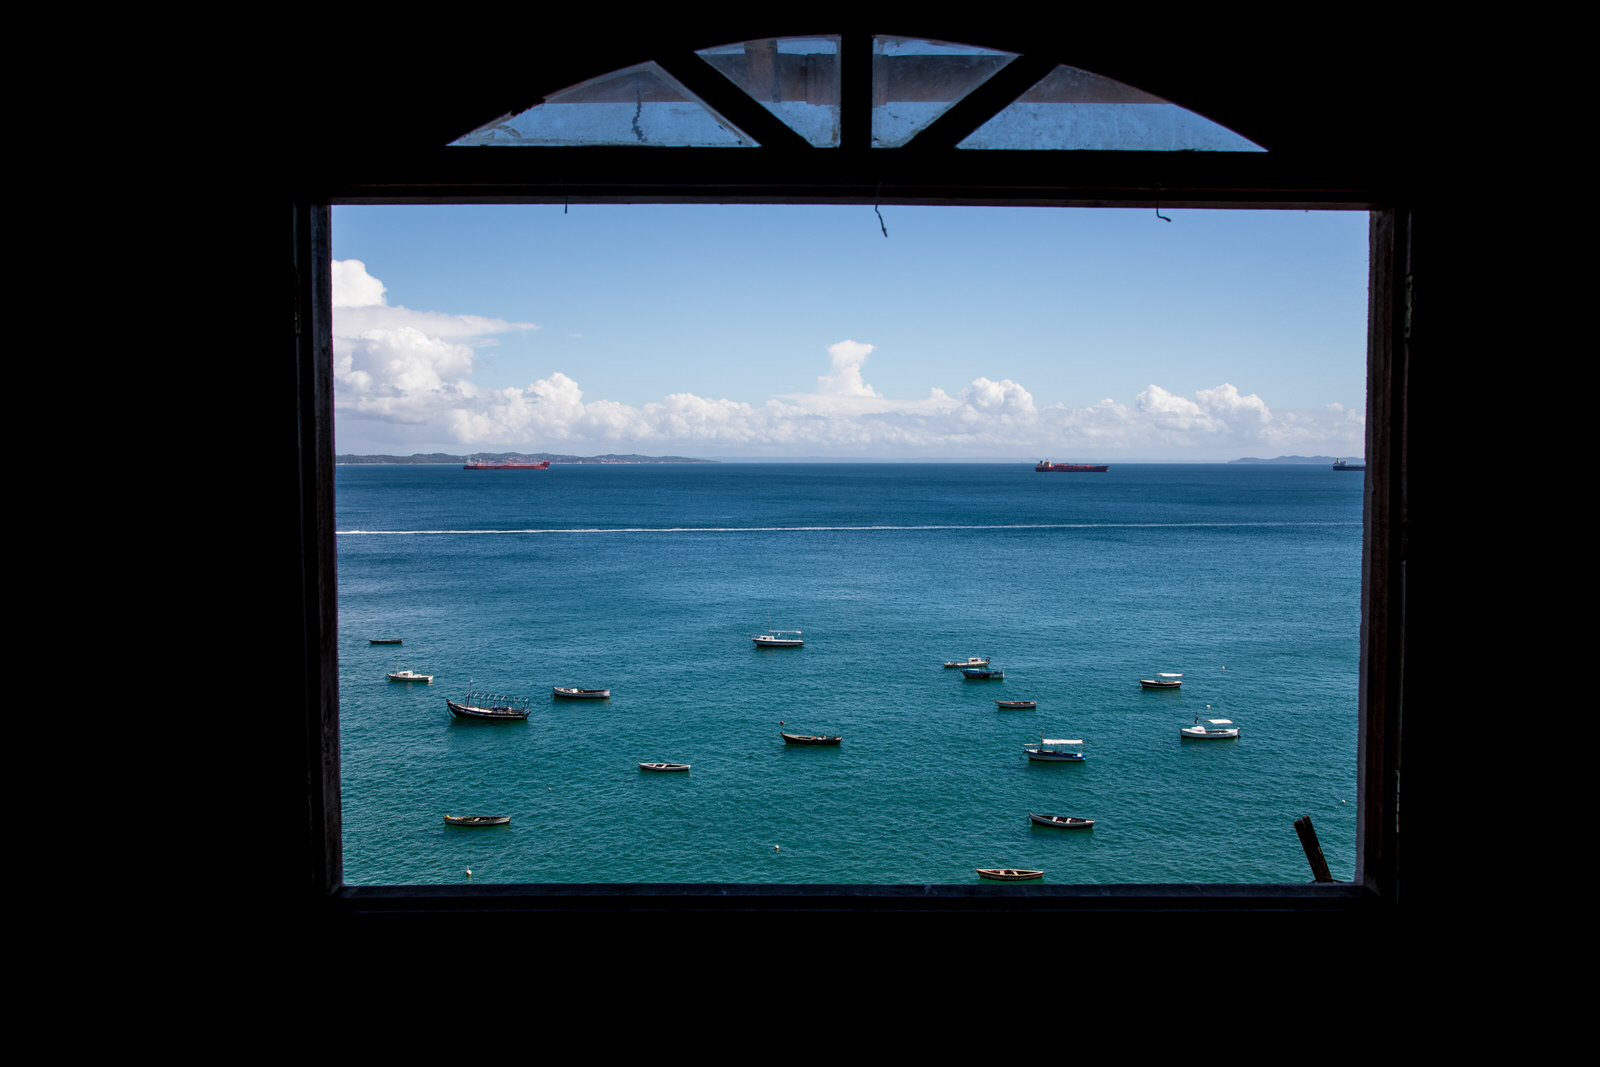  The community centre in Gamboa de Baixo looks out to the ocean. The community has been misrecognised and portrayed as a place of drugs, criminality and dirt. These representations are perpetuated in the media. 